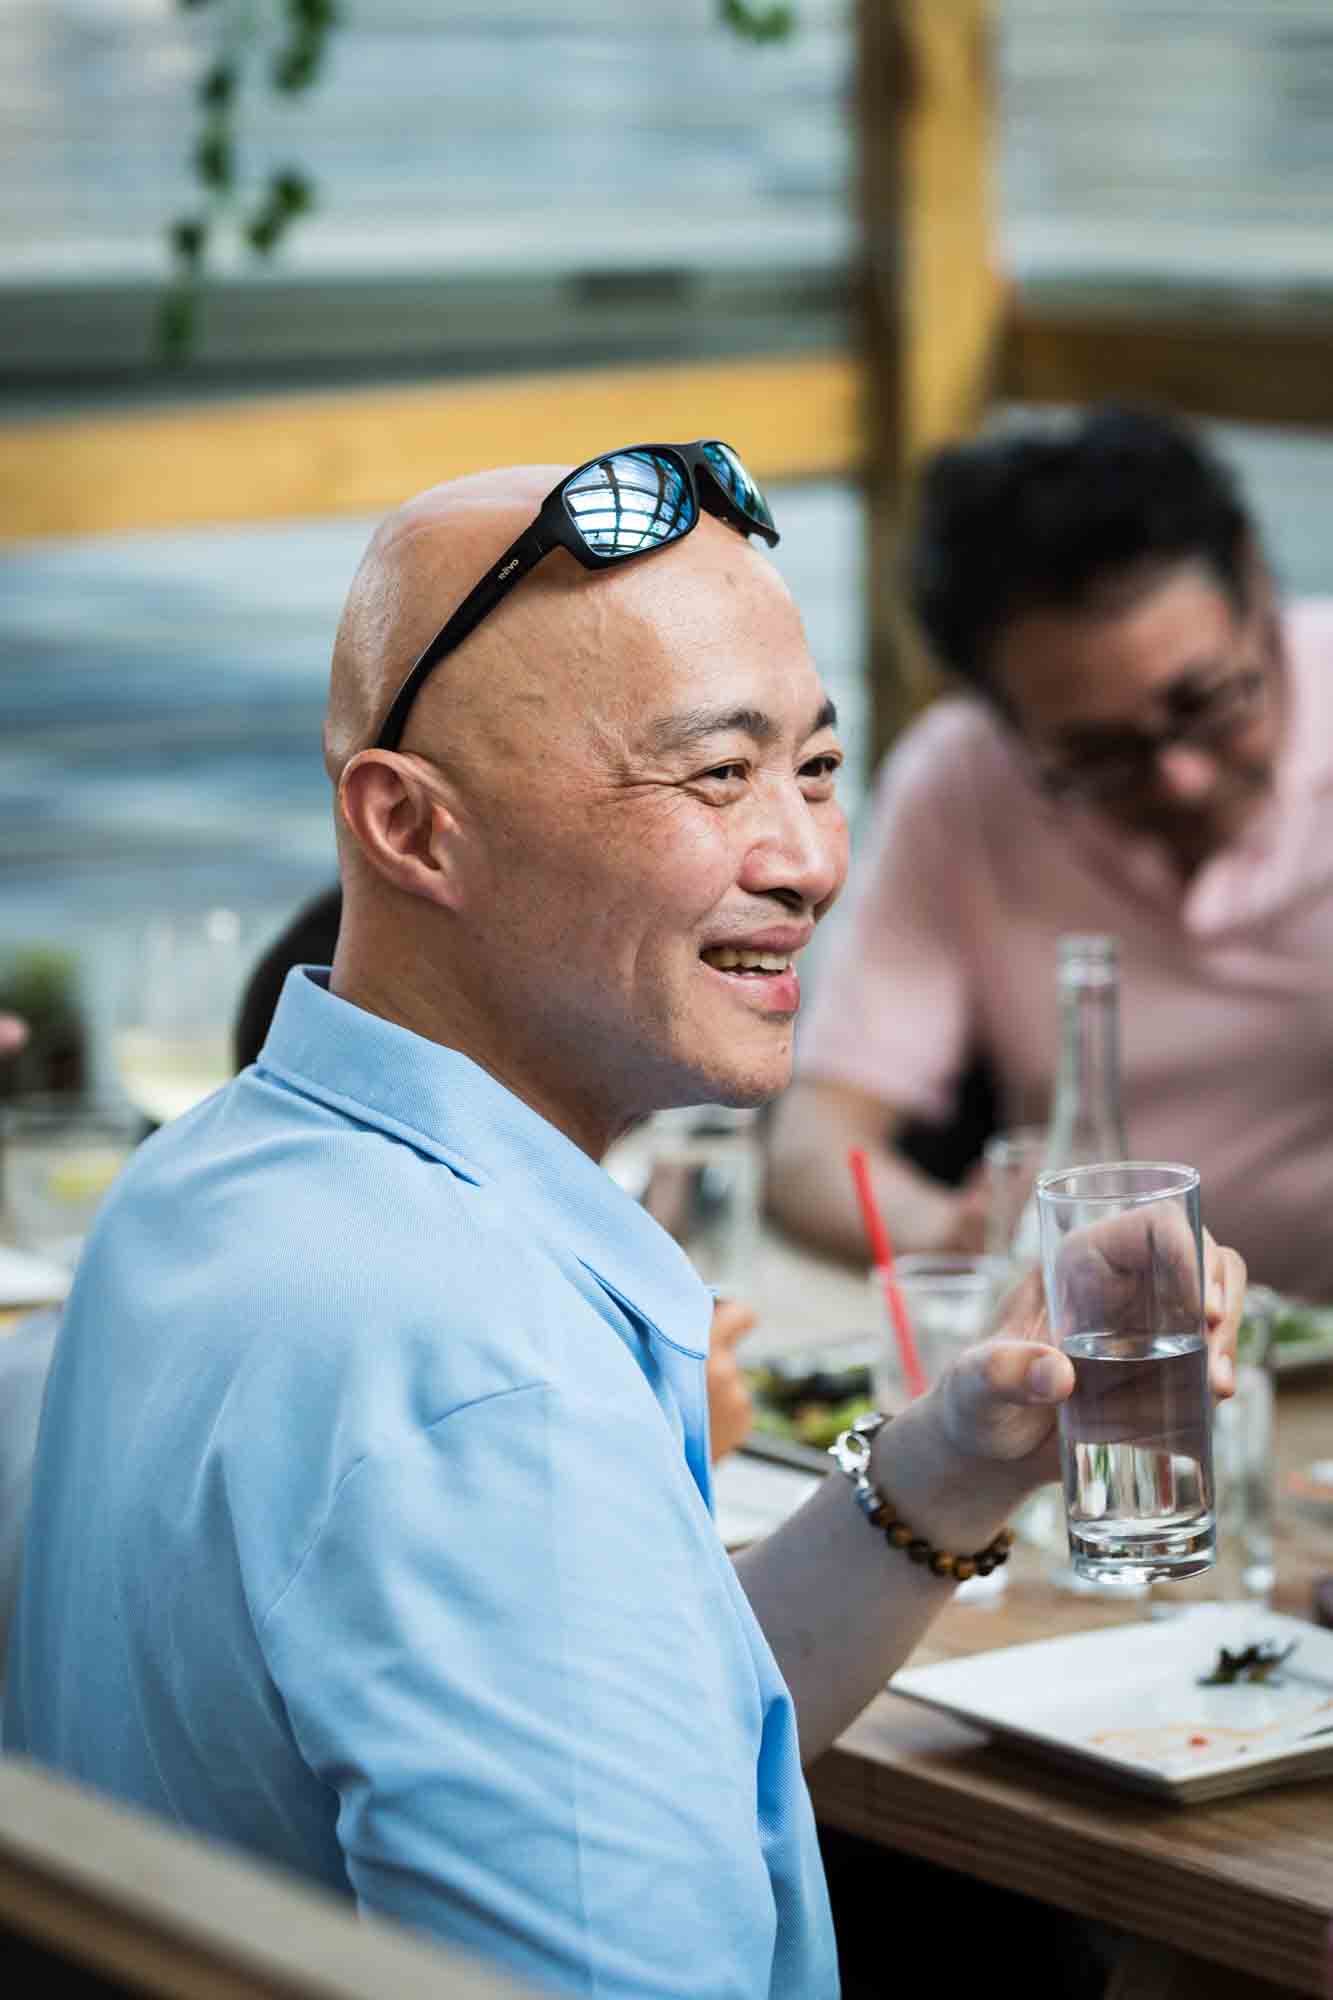 Bald Asian man with sunglasses on his head during rehearsal dinner at an outdoor restaurant